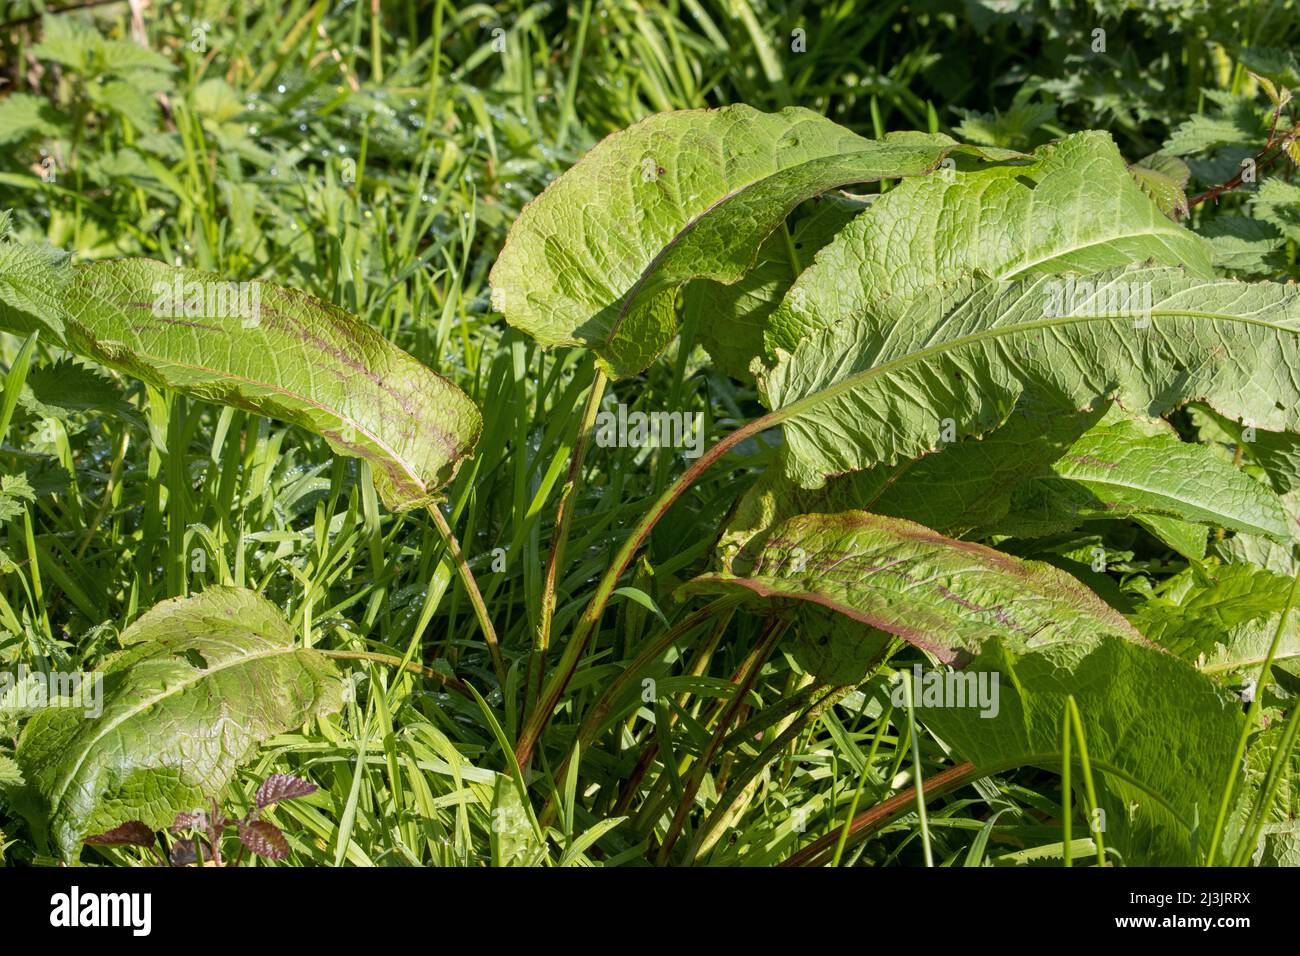 Broad-leaved dock  (Rumex obtusifolius) on a natural green background Stock Photo